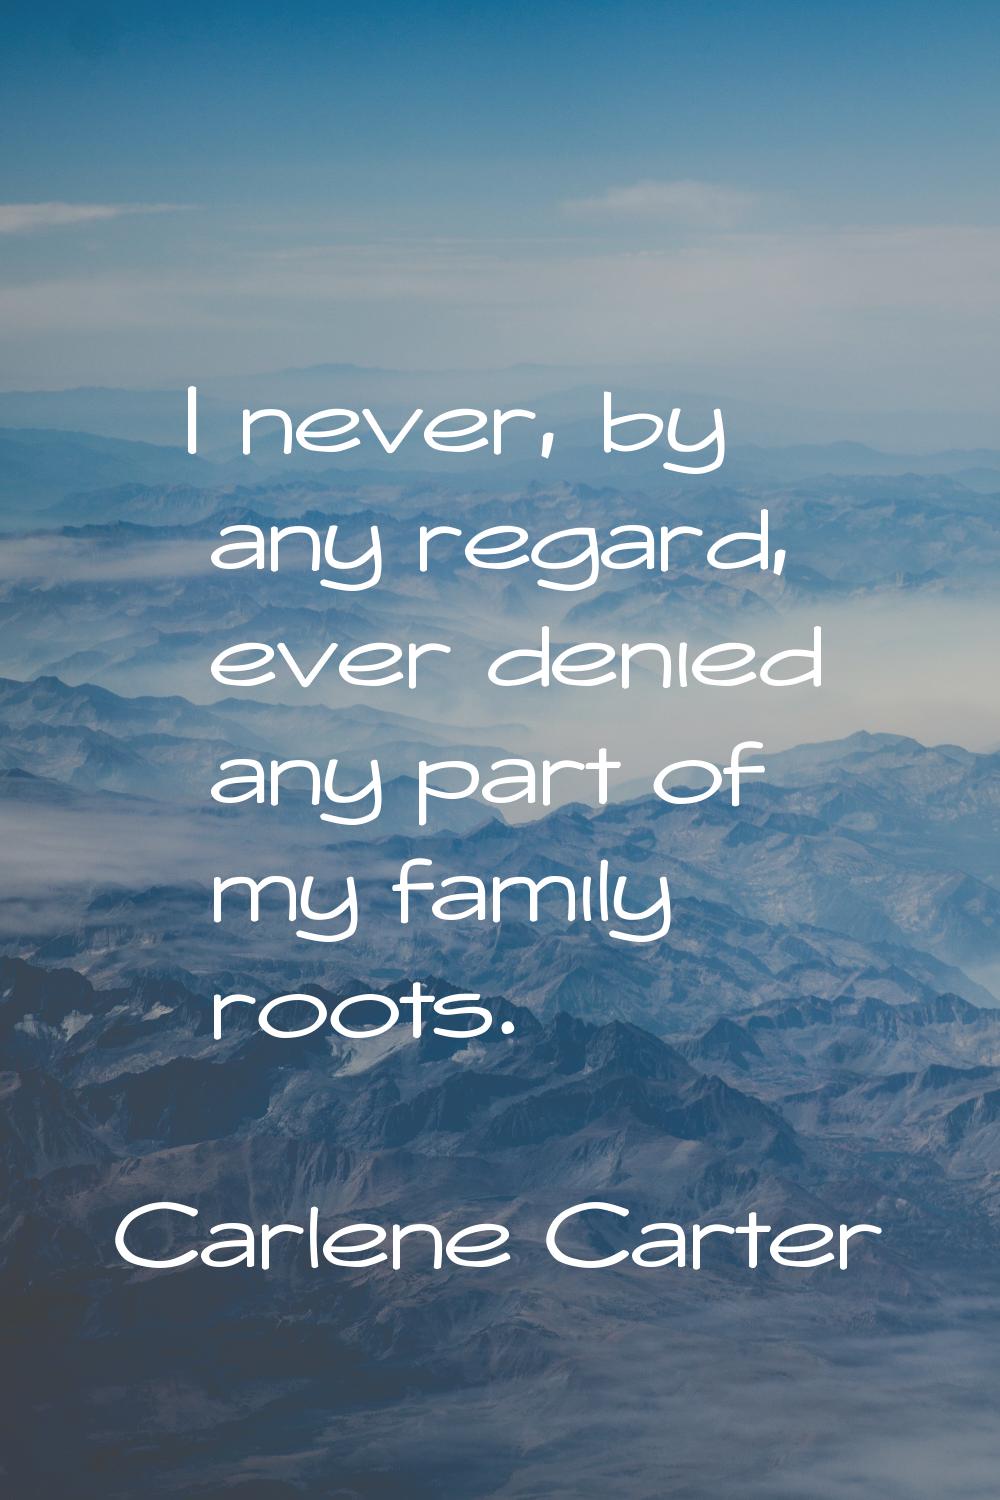 I never, by any regard, ever denied any part of my family roots.